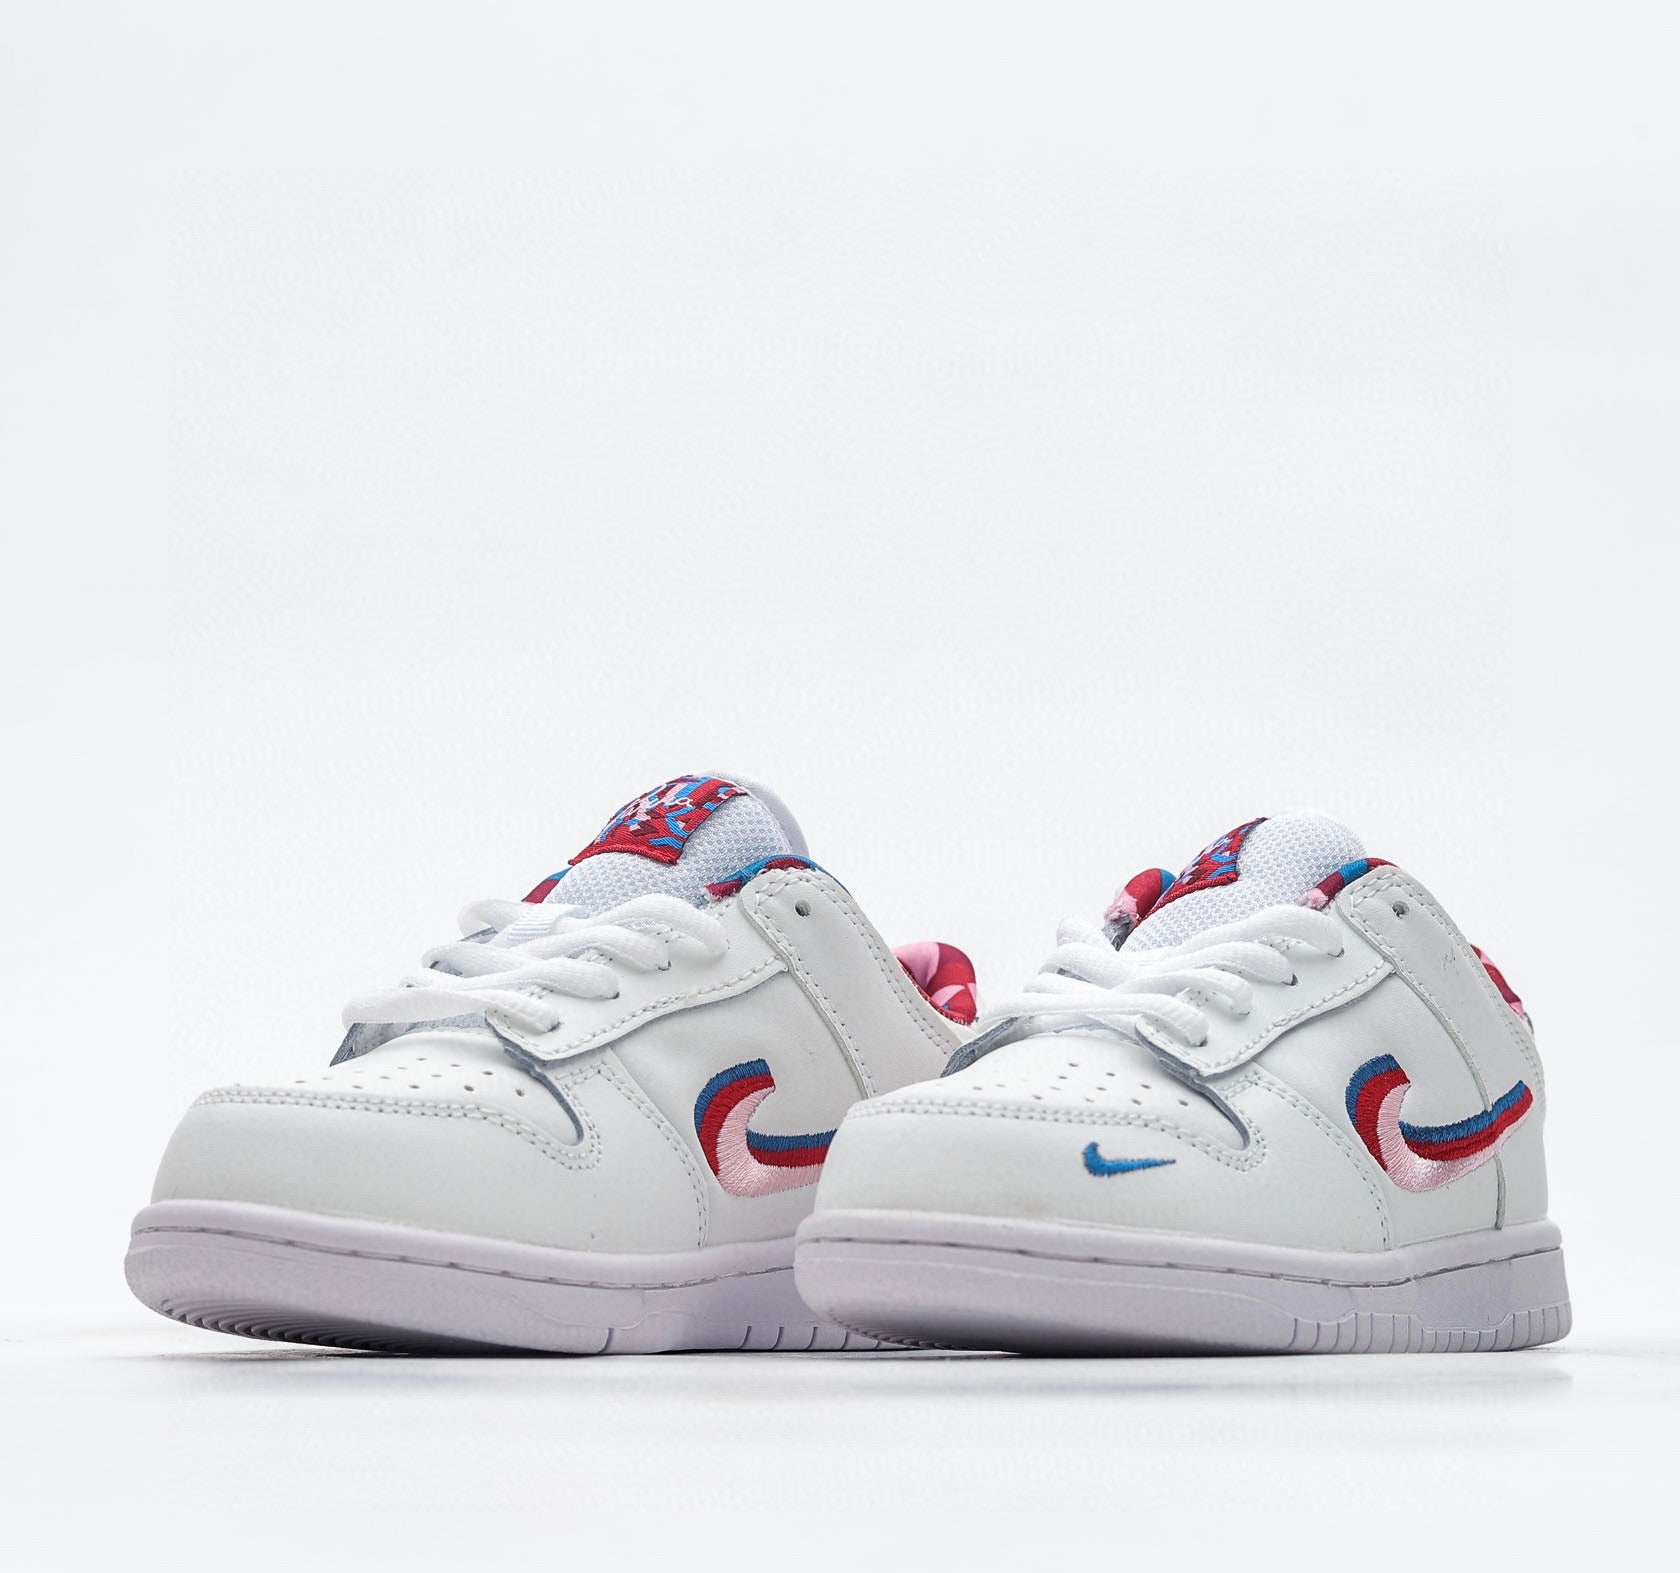 Nike SB white and red shoes